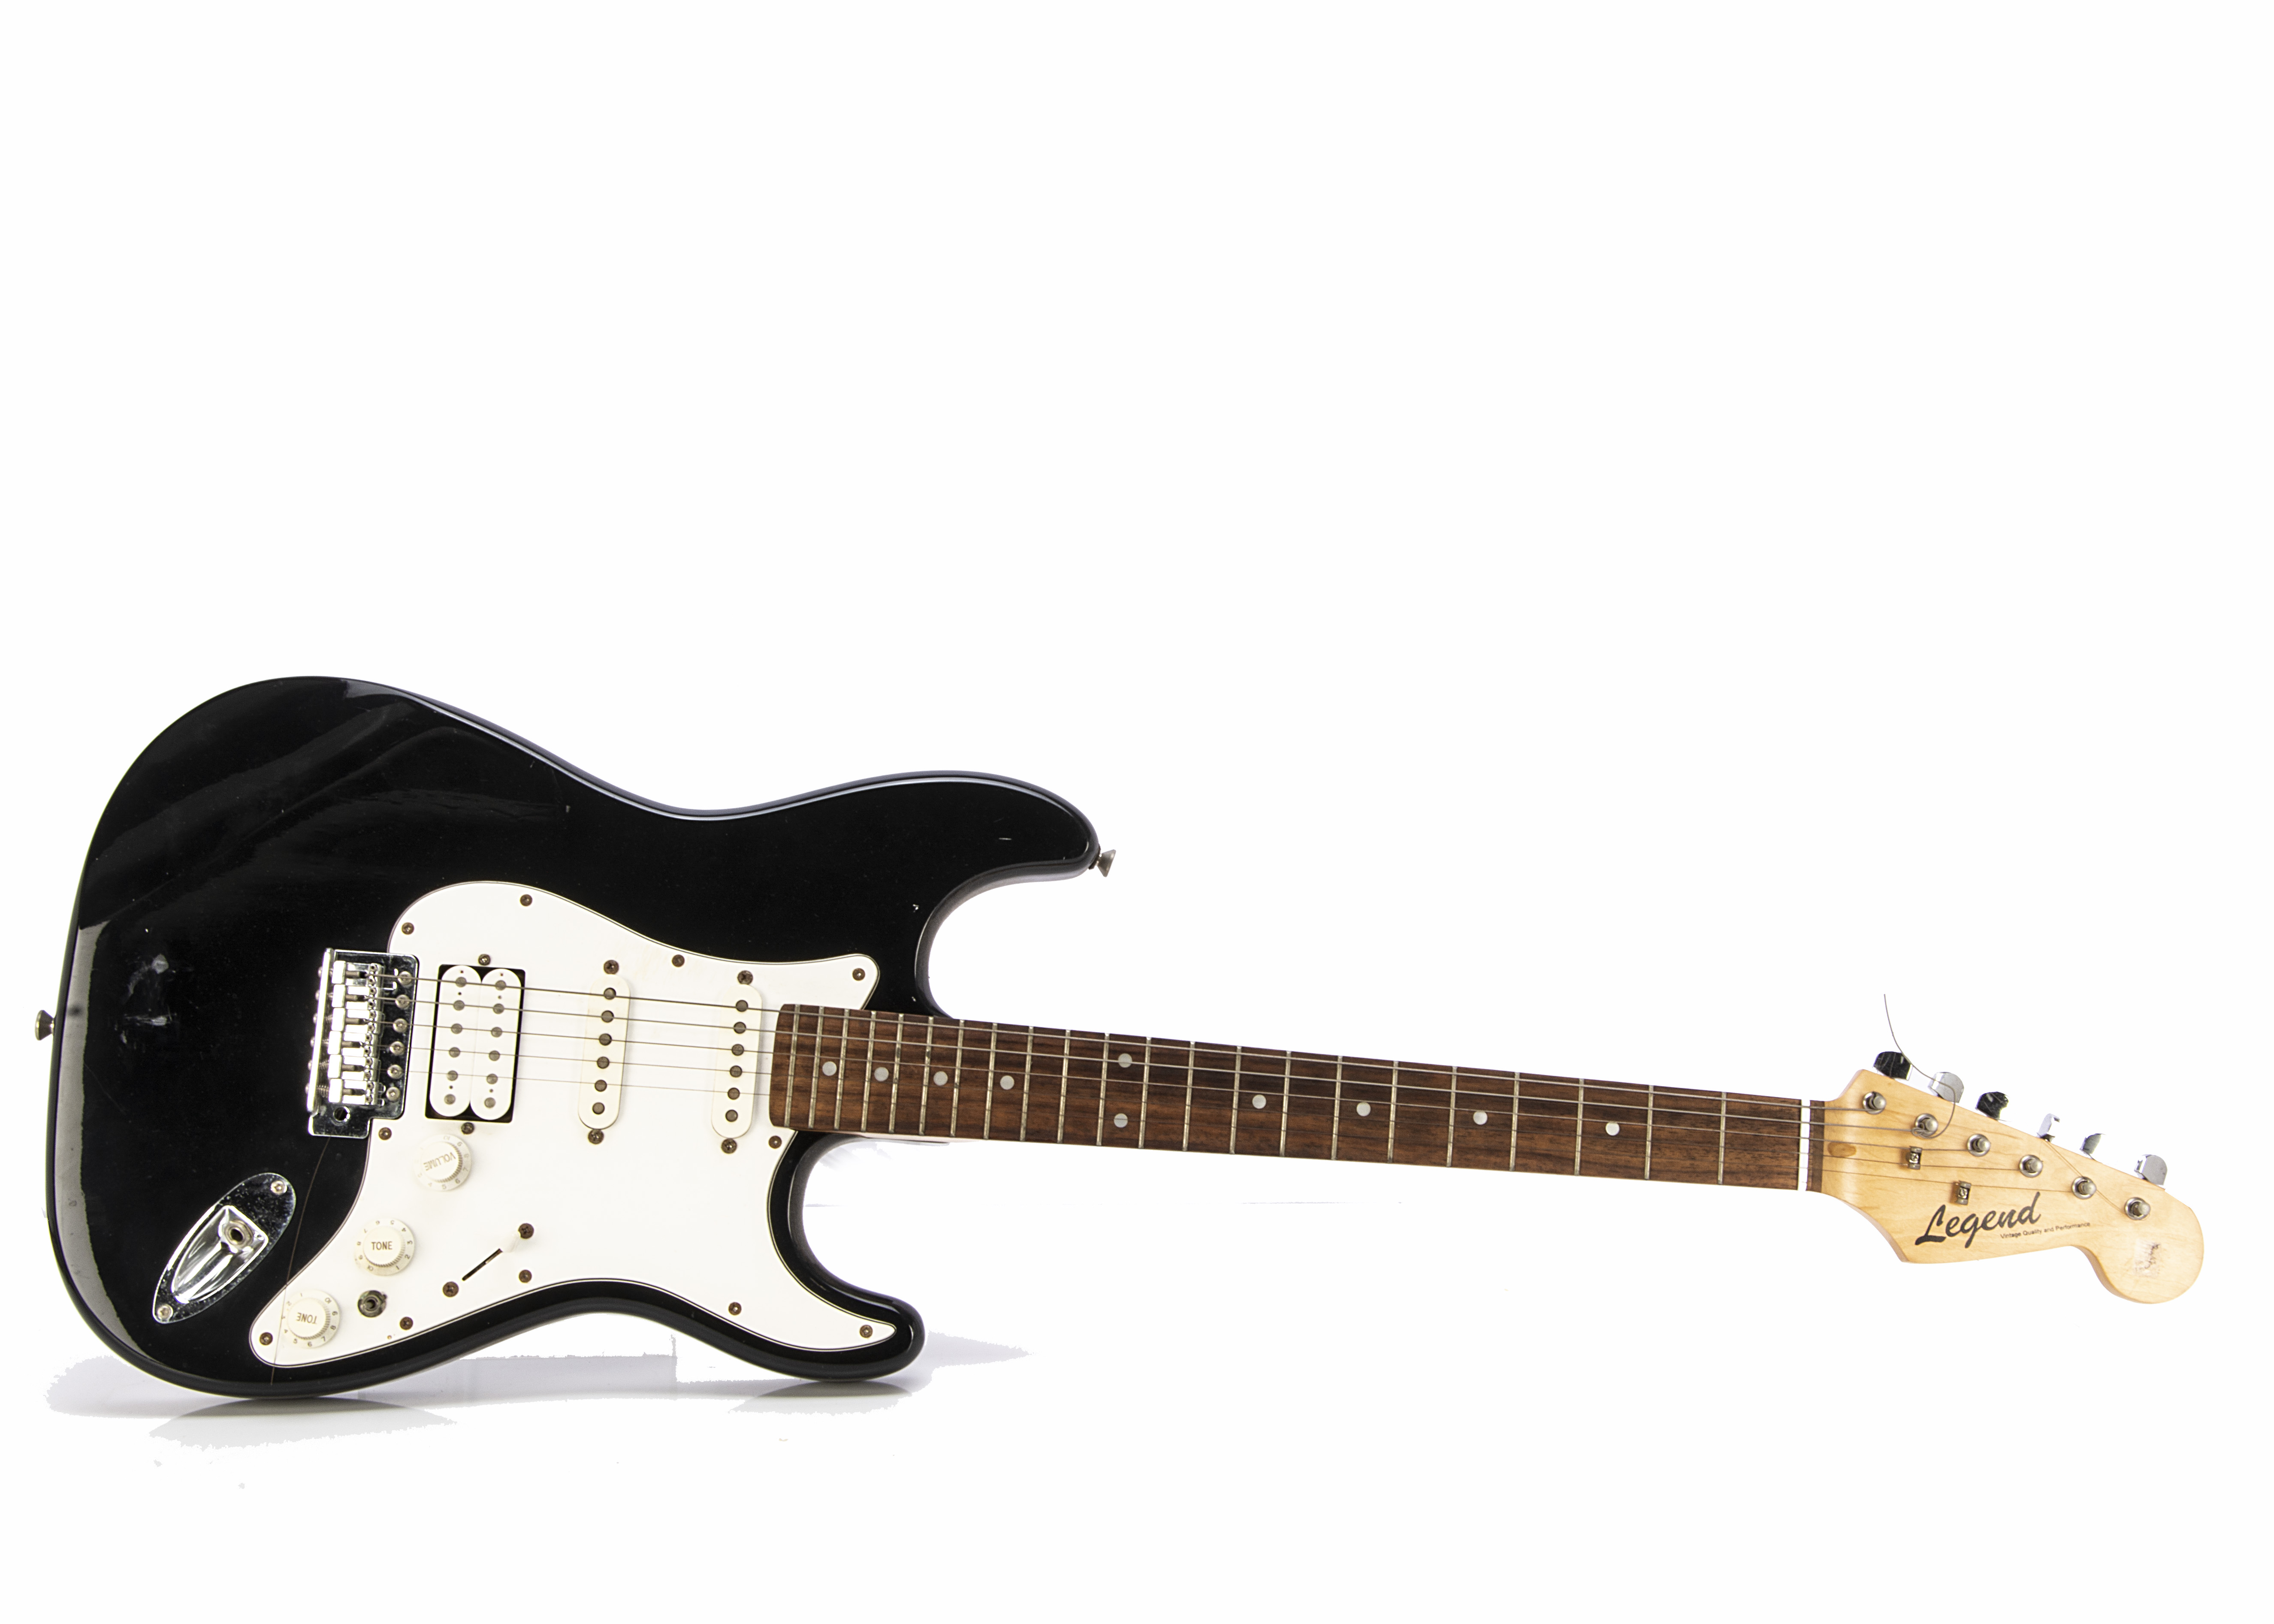 Three Electric Guitars, three Stratocaster style electric guitars, a Marlin Slammer s/n 734056, a - Image 3 of 6